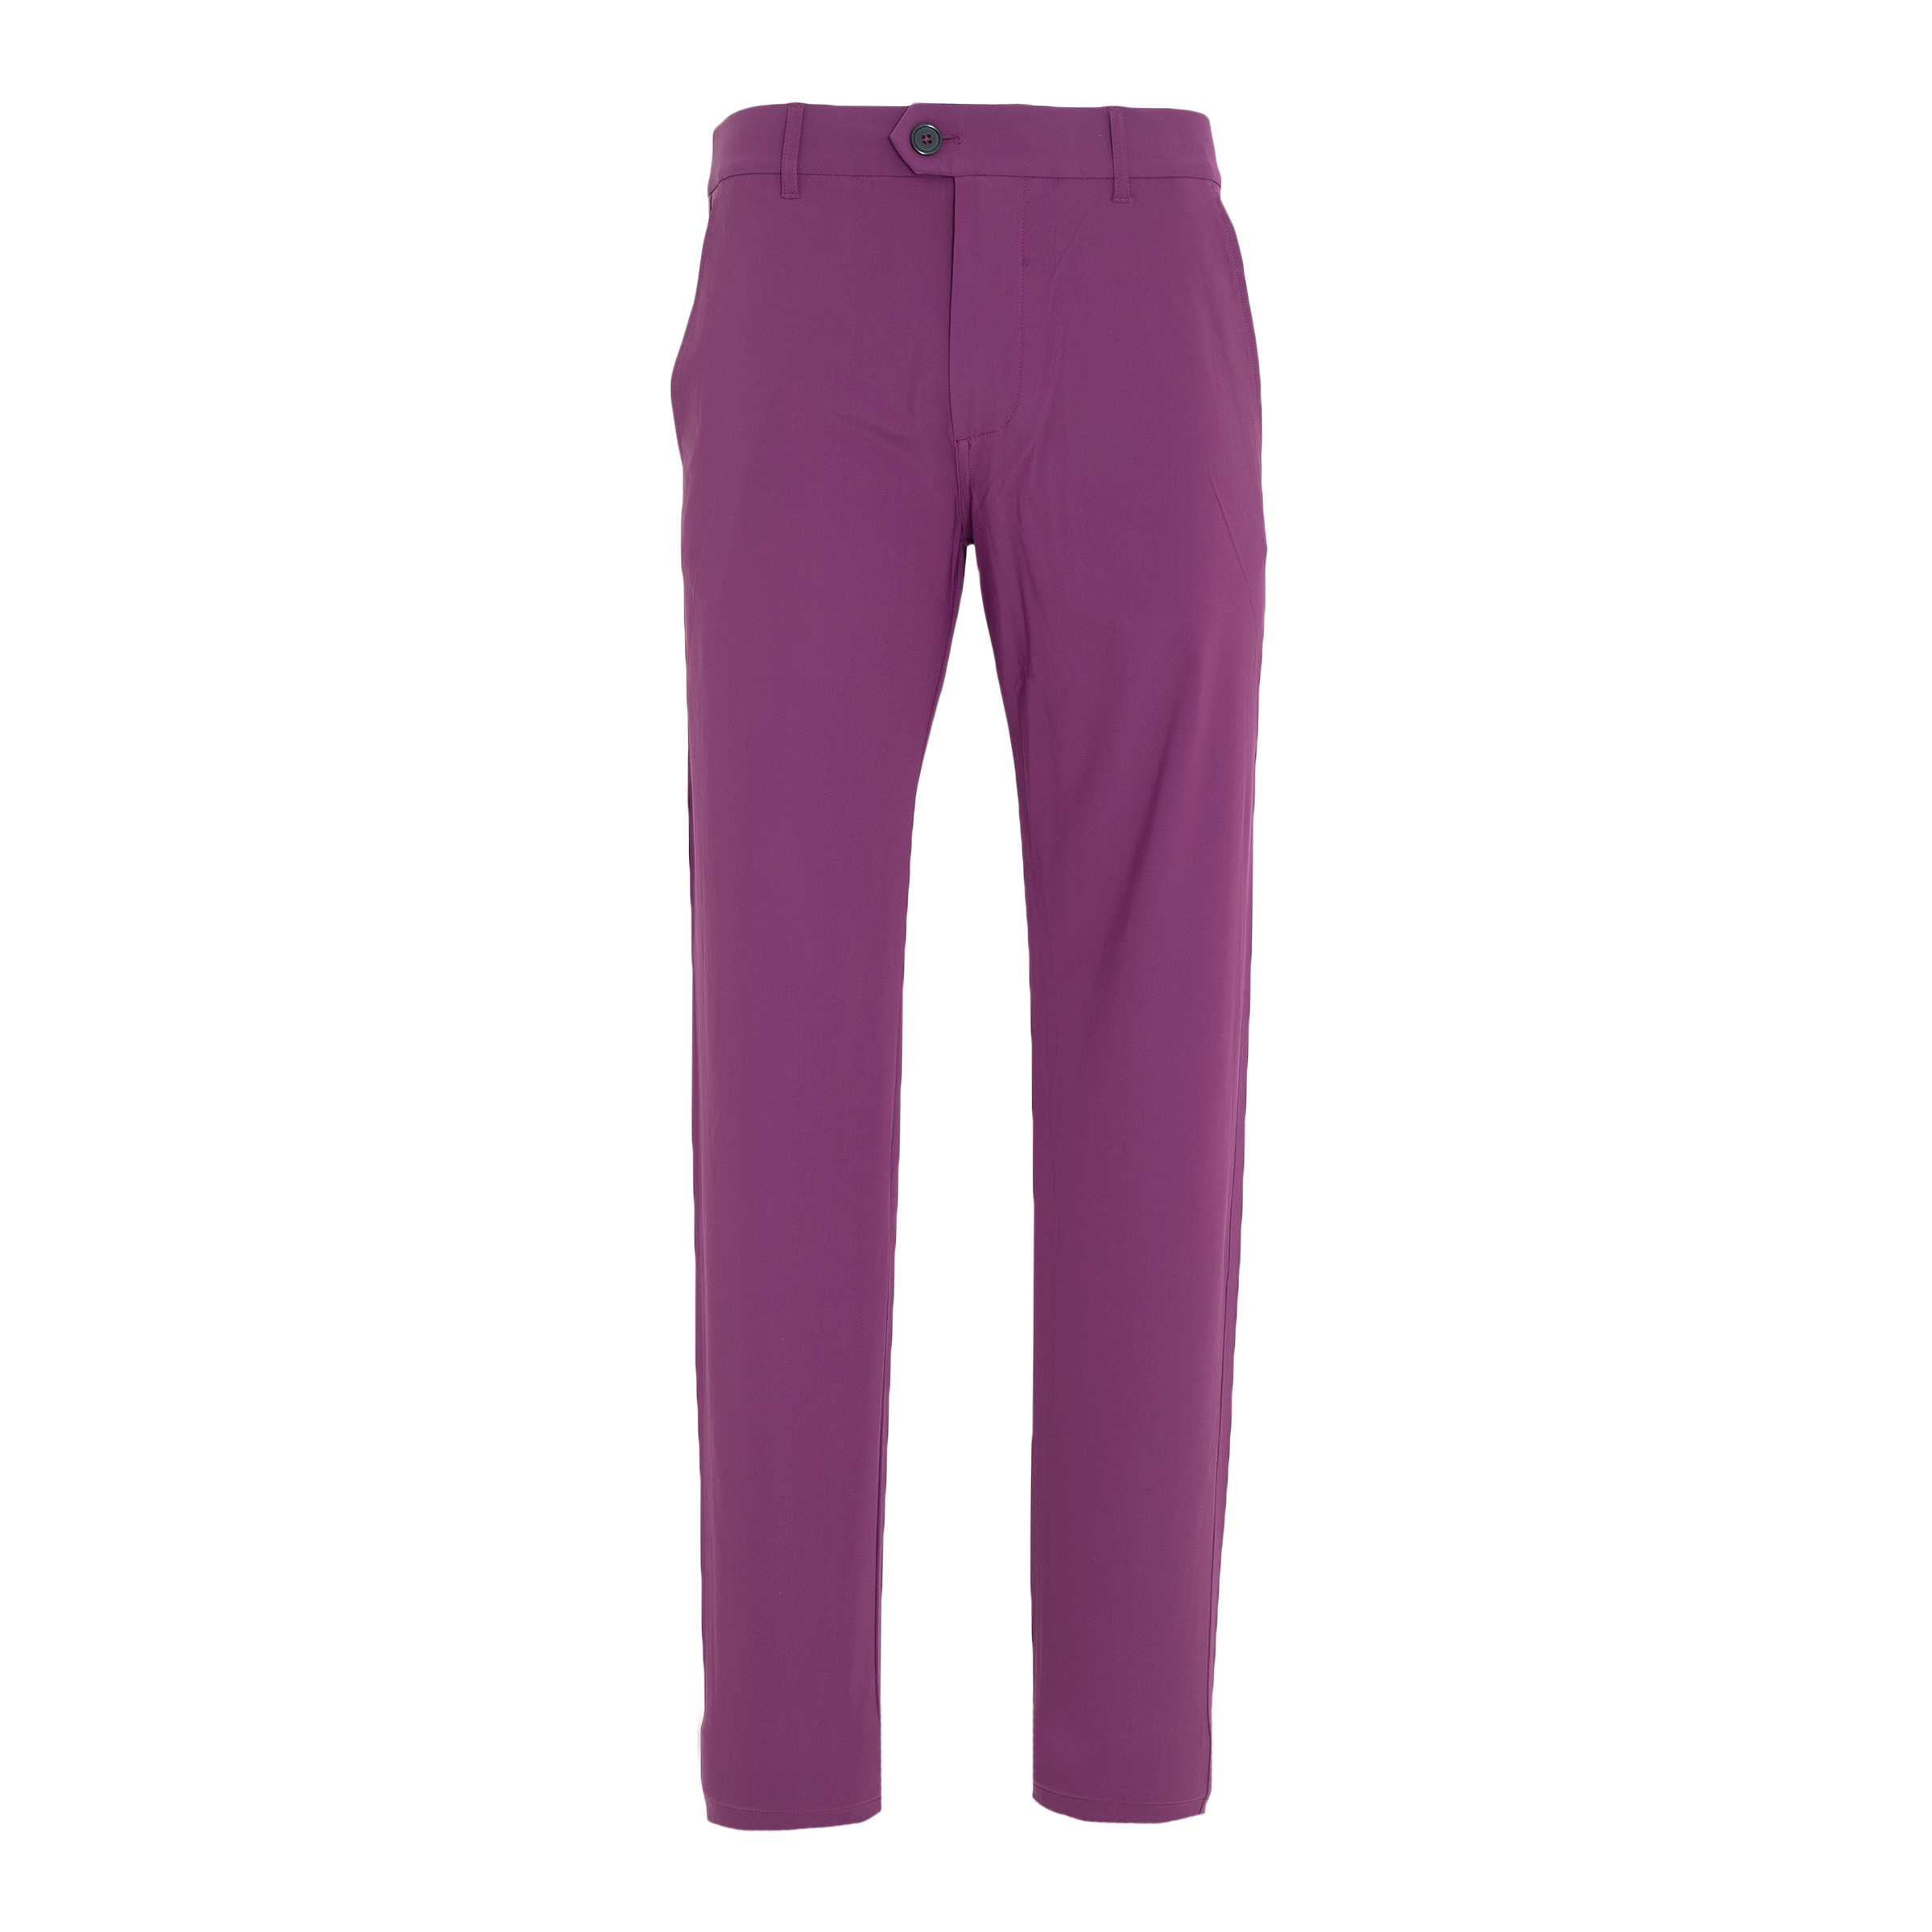 Alberto ROOKIE - Coffee Chino Pants in anthracite buy online - Golf House